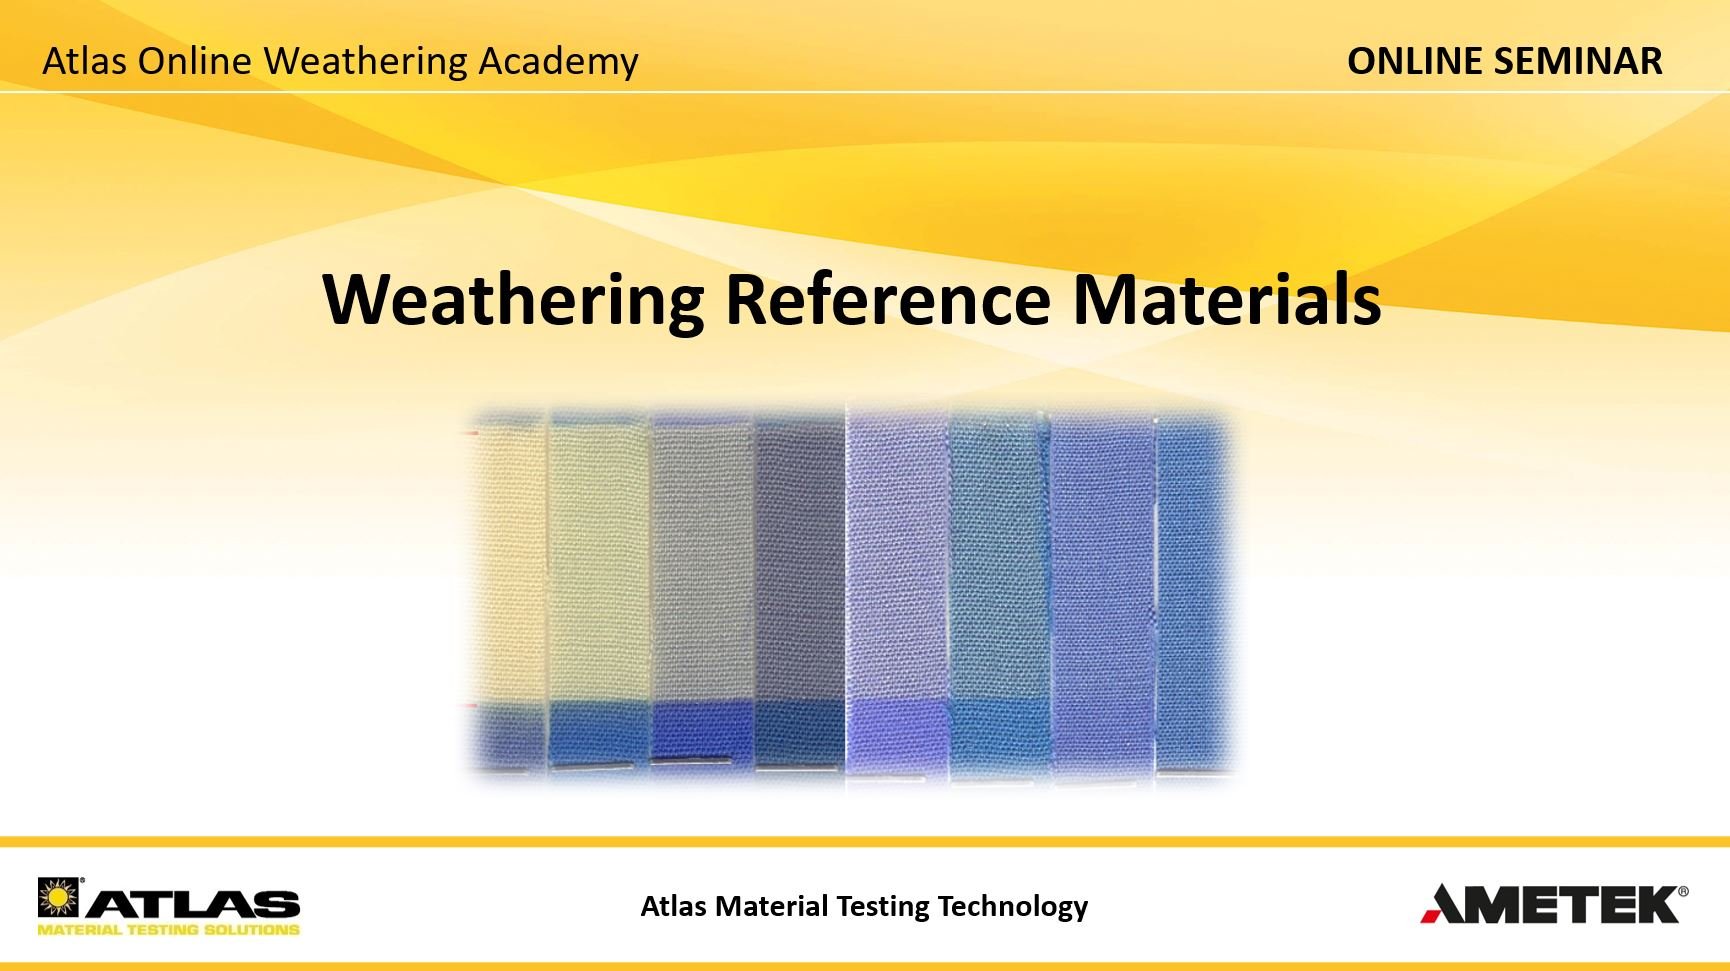 16-9 Online Seminar-Cover-Reference-Materials AR-2022-08-10